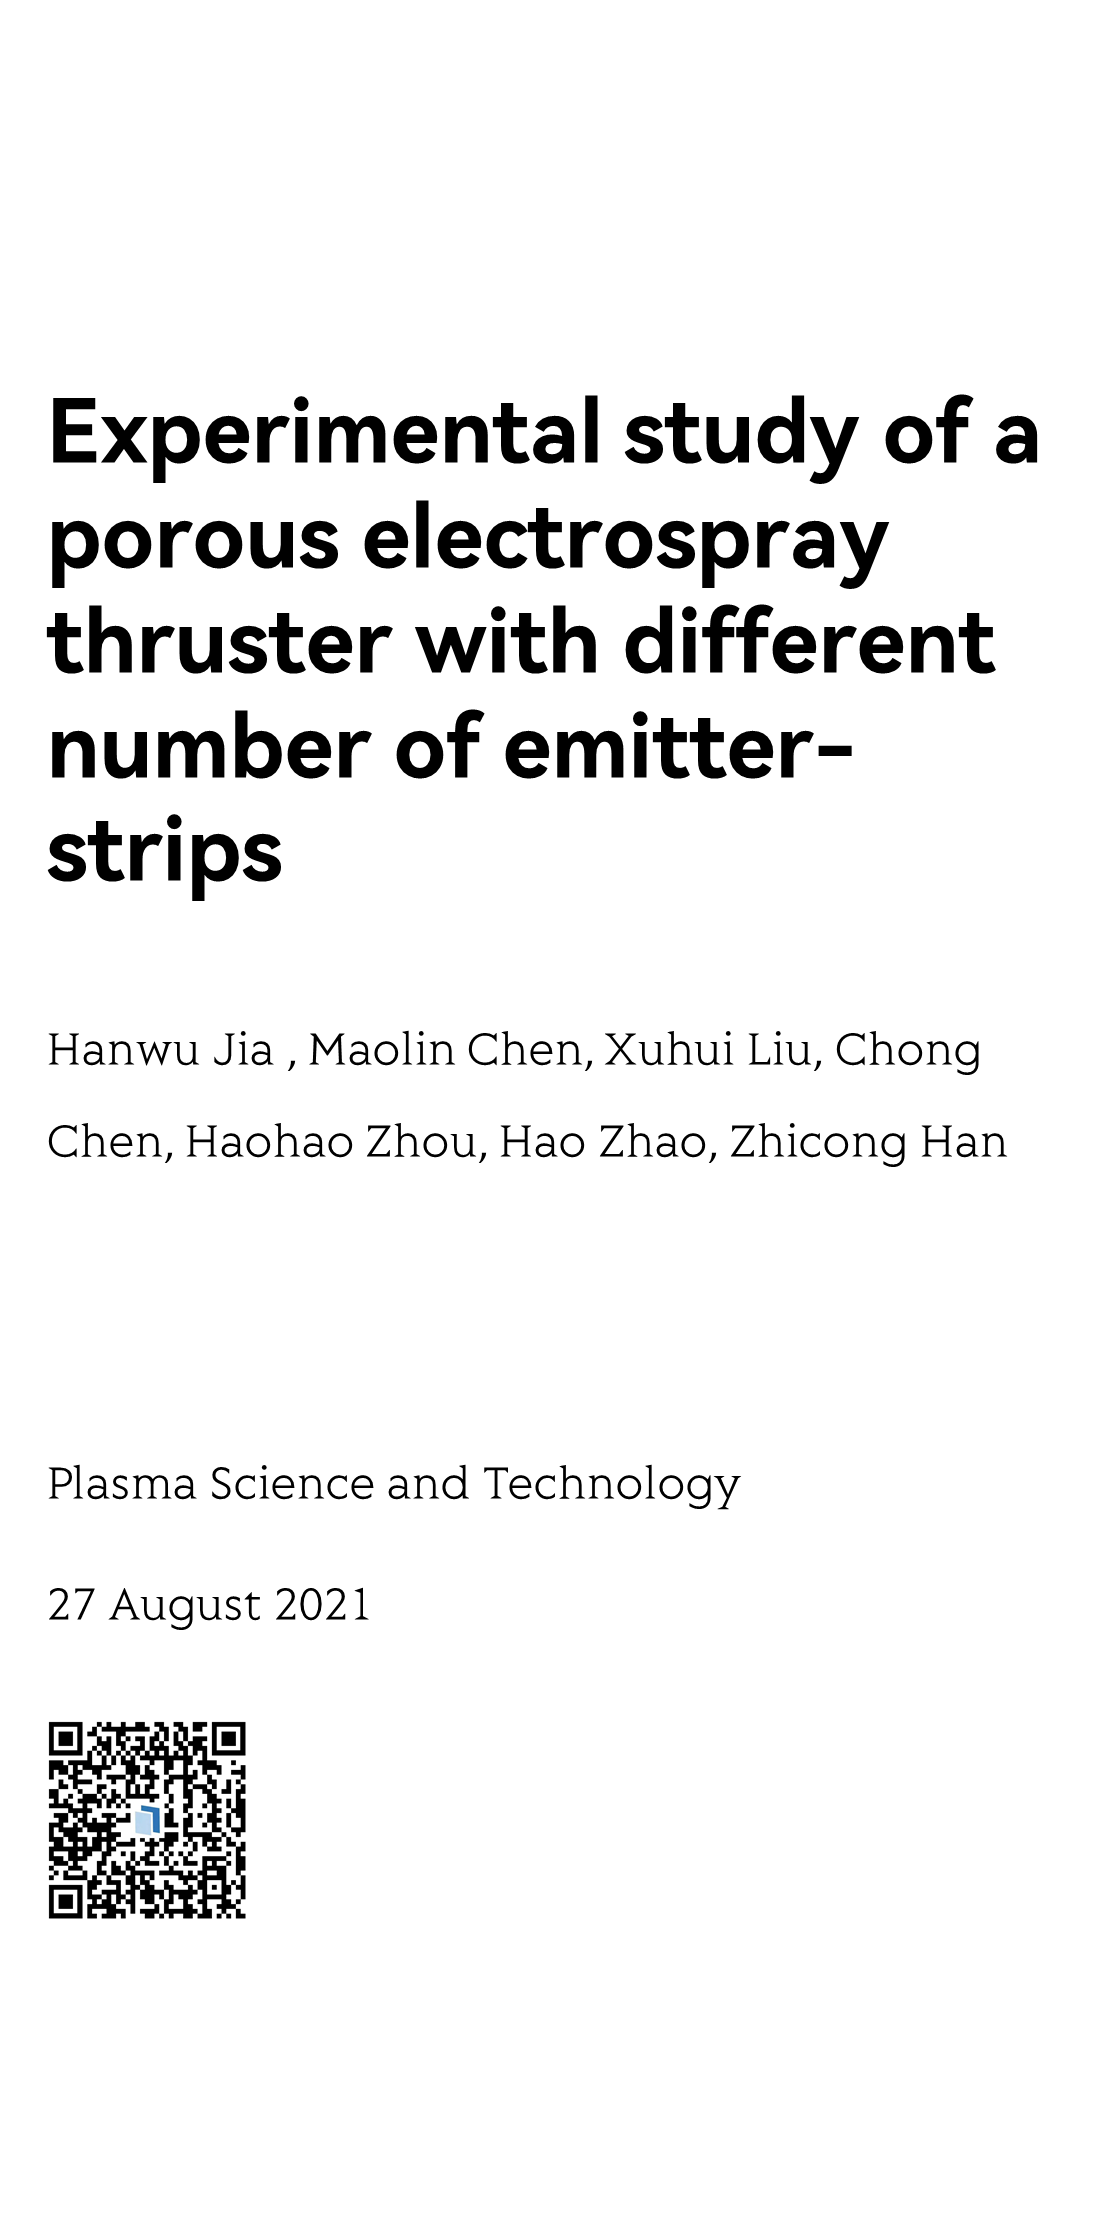 Experimental study of a porous electrospray thruster with different number of emitter-strips_1